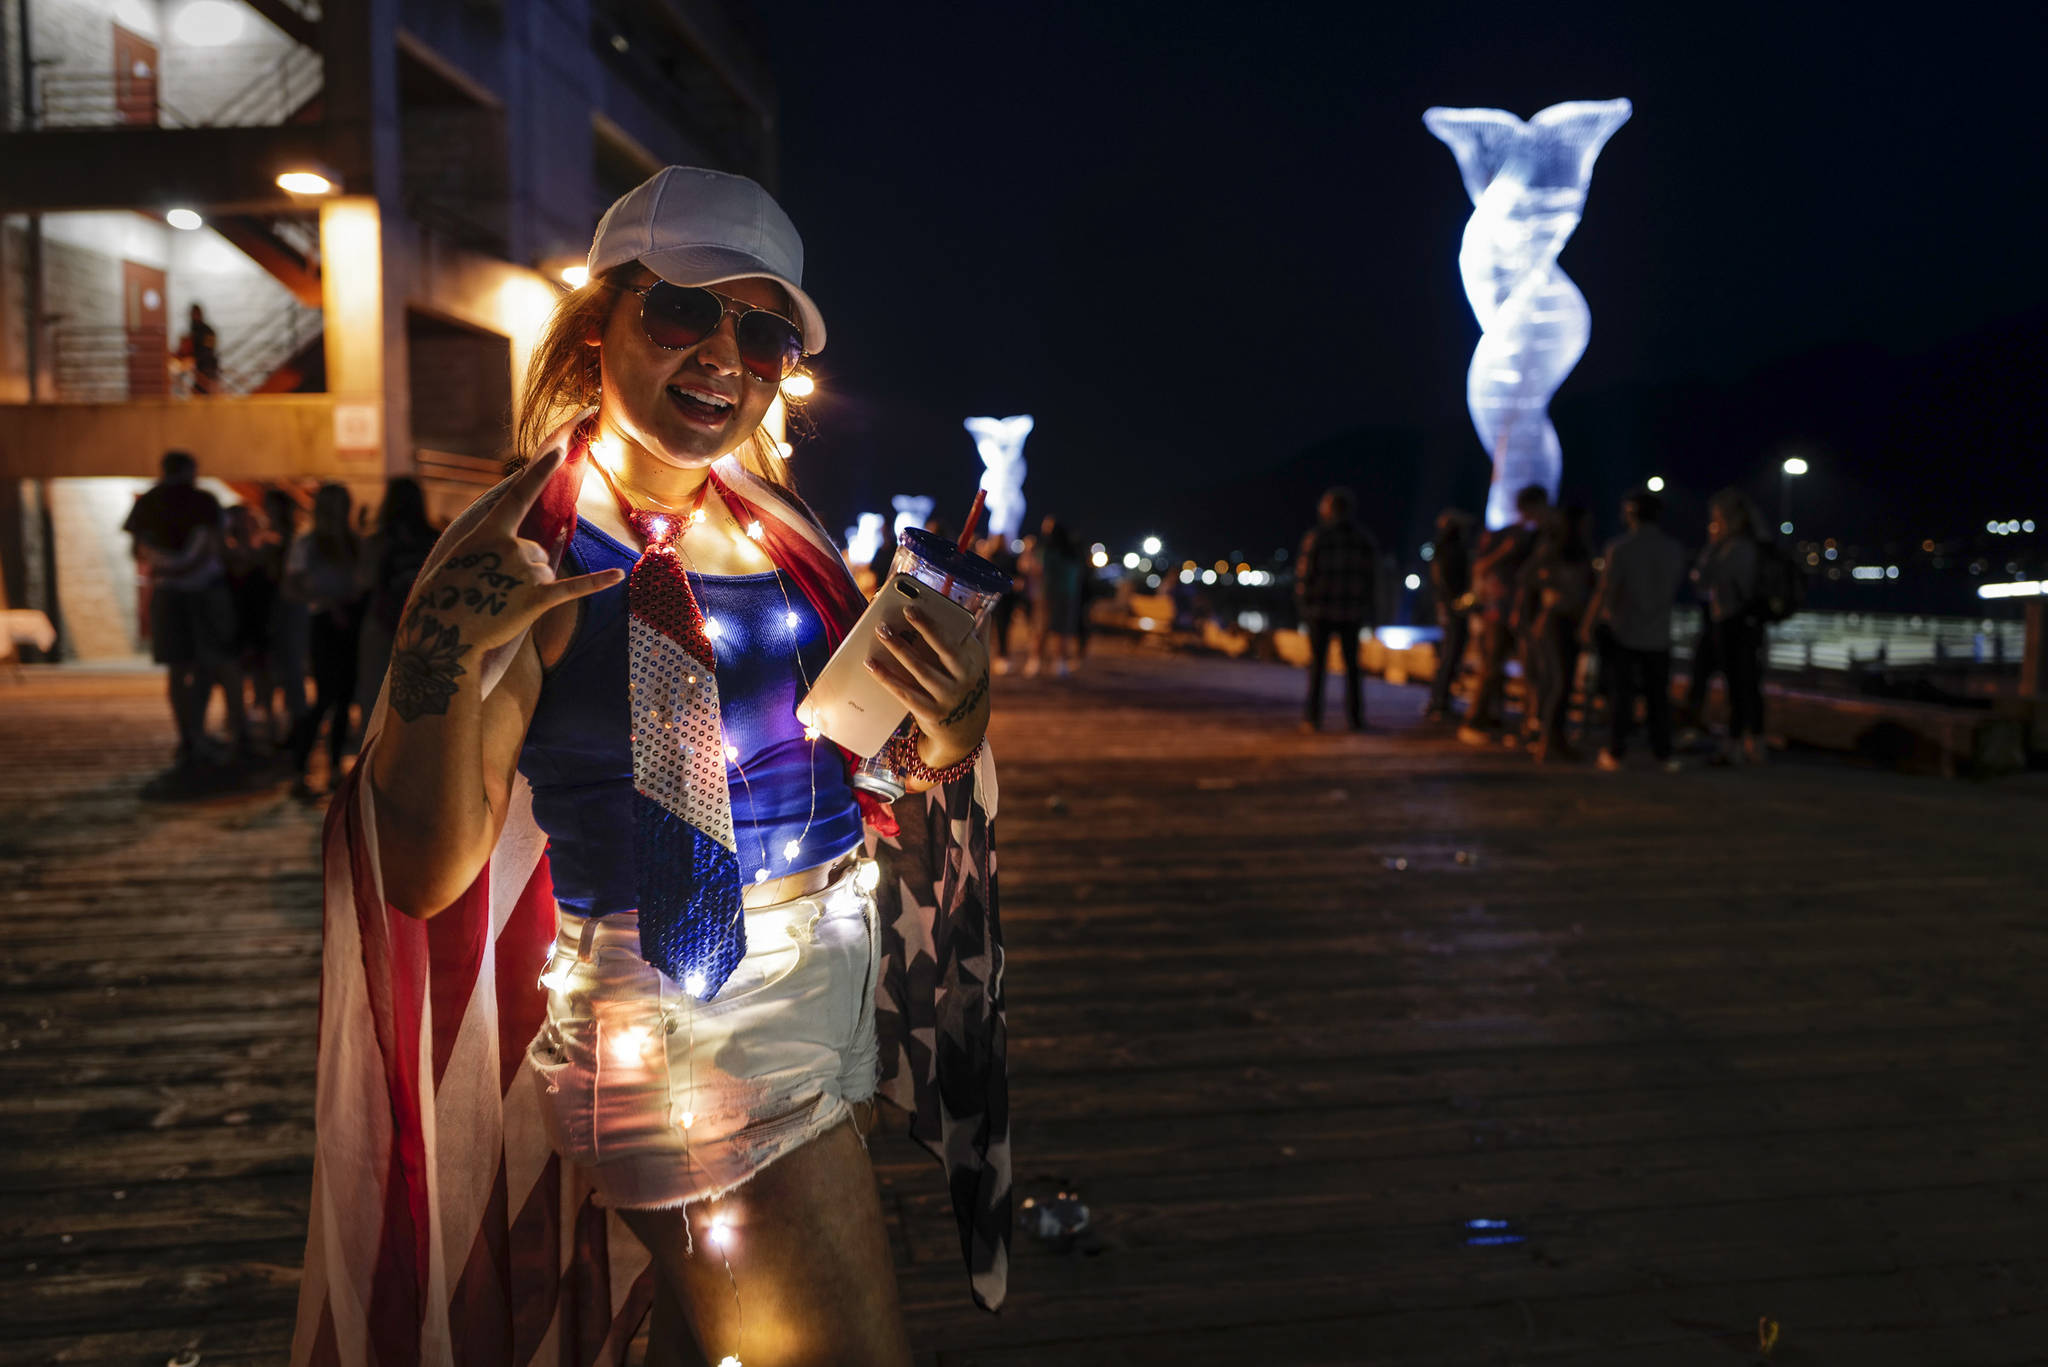 Savannah Meketa shows her patriotic spirit as Juneau residents gather around the downtown waterfront to watch the annual fireworks display on Wednesday, July 3, 2019. (Michael Penn | Juneau Empire)